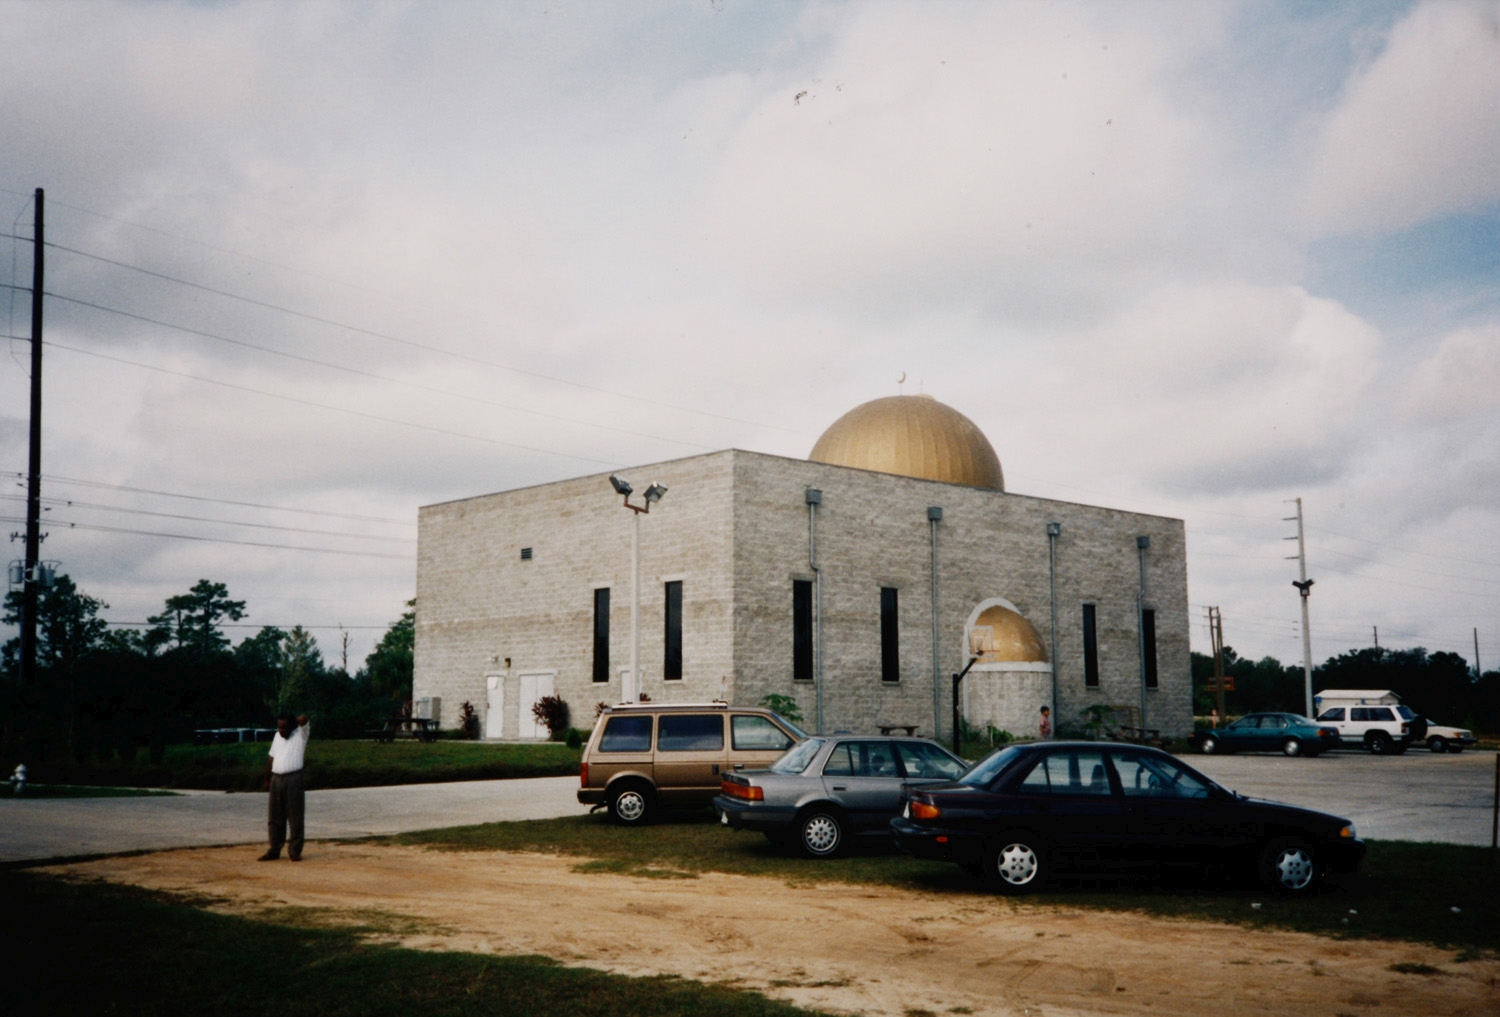 Exterior, rear view, with projecting mihrab